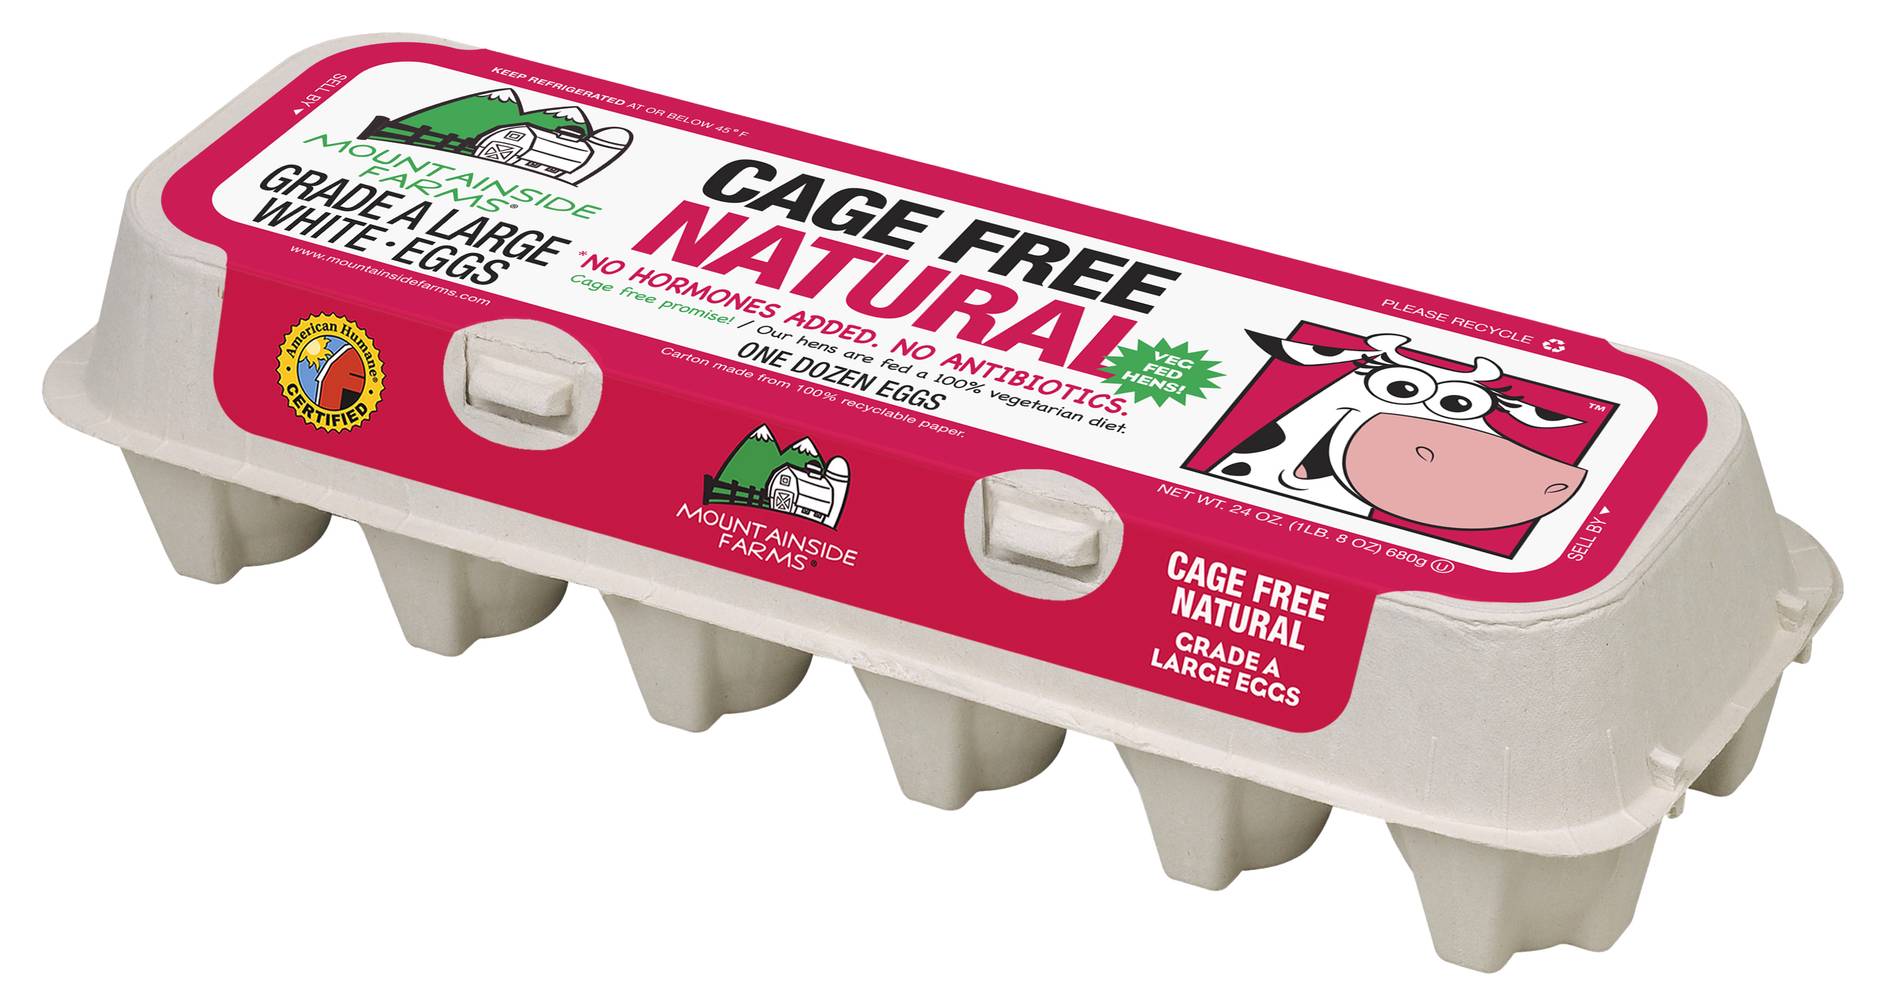 Mountainside Farms Cage Free Natural Eggs